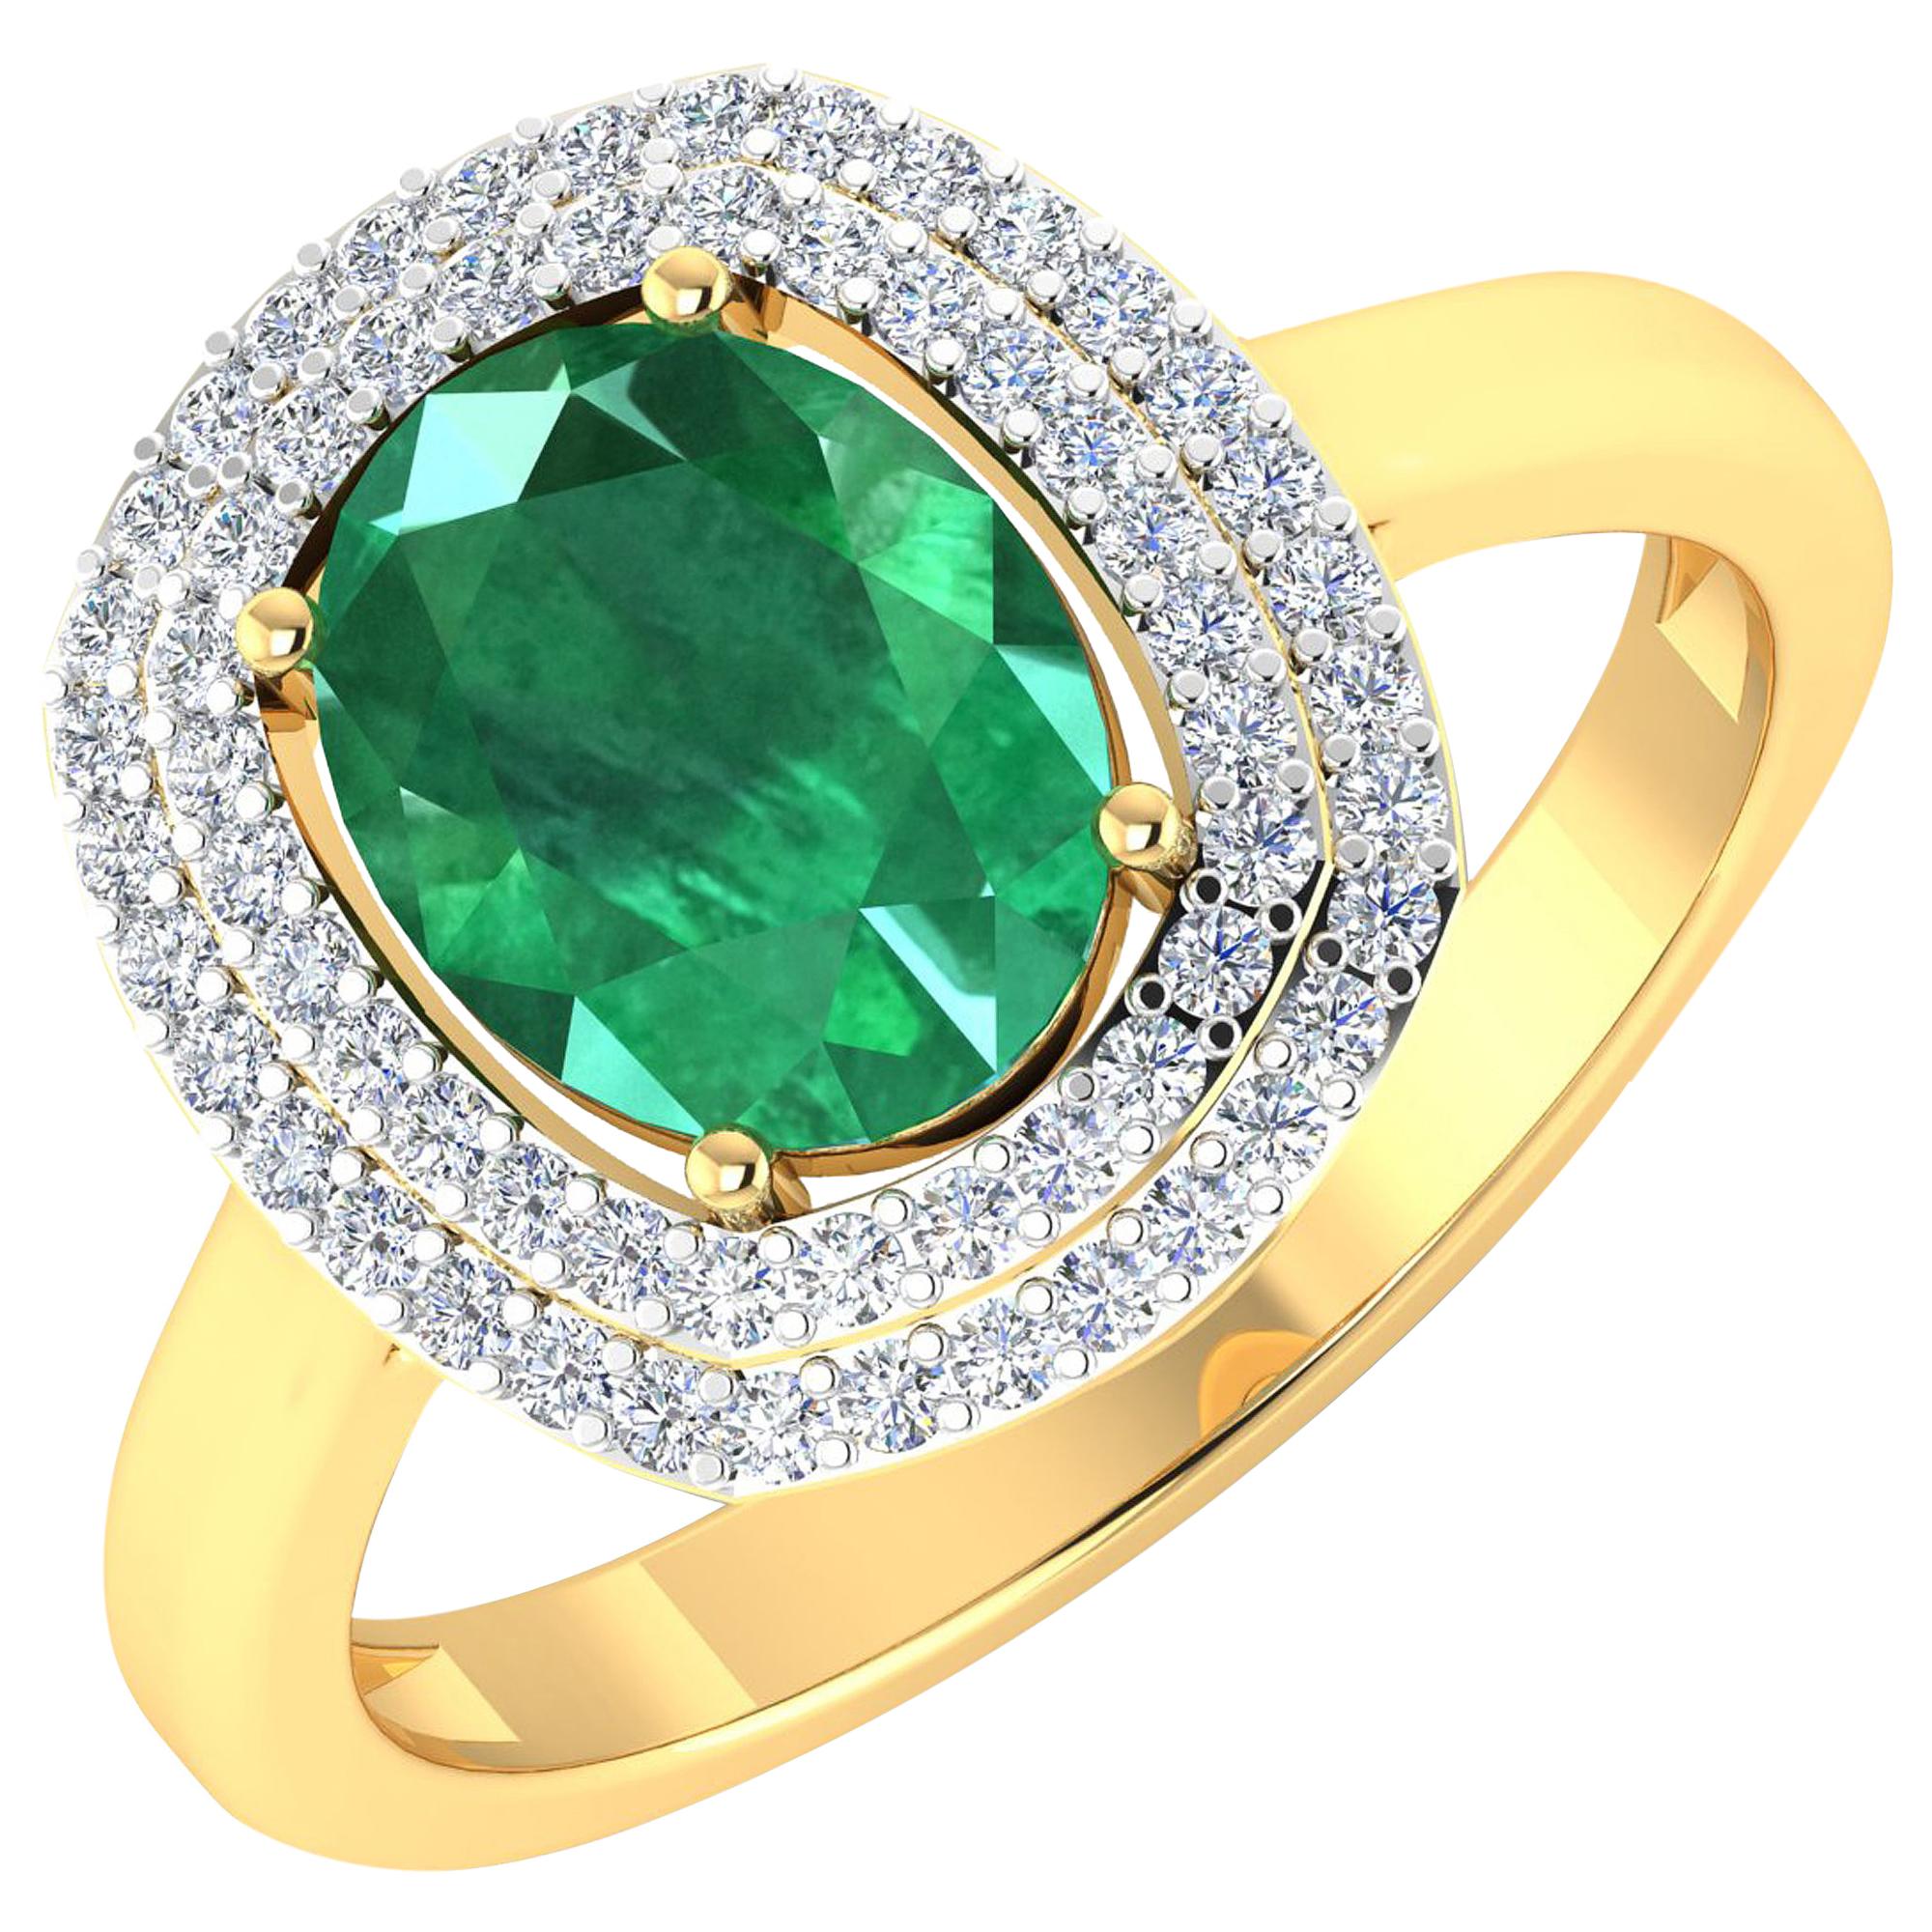 Emerald Gold Ring, 14 Karat Gold Emerald and Diamond Ring, 1.93 Carat For Sale